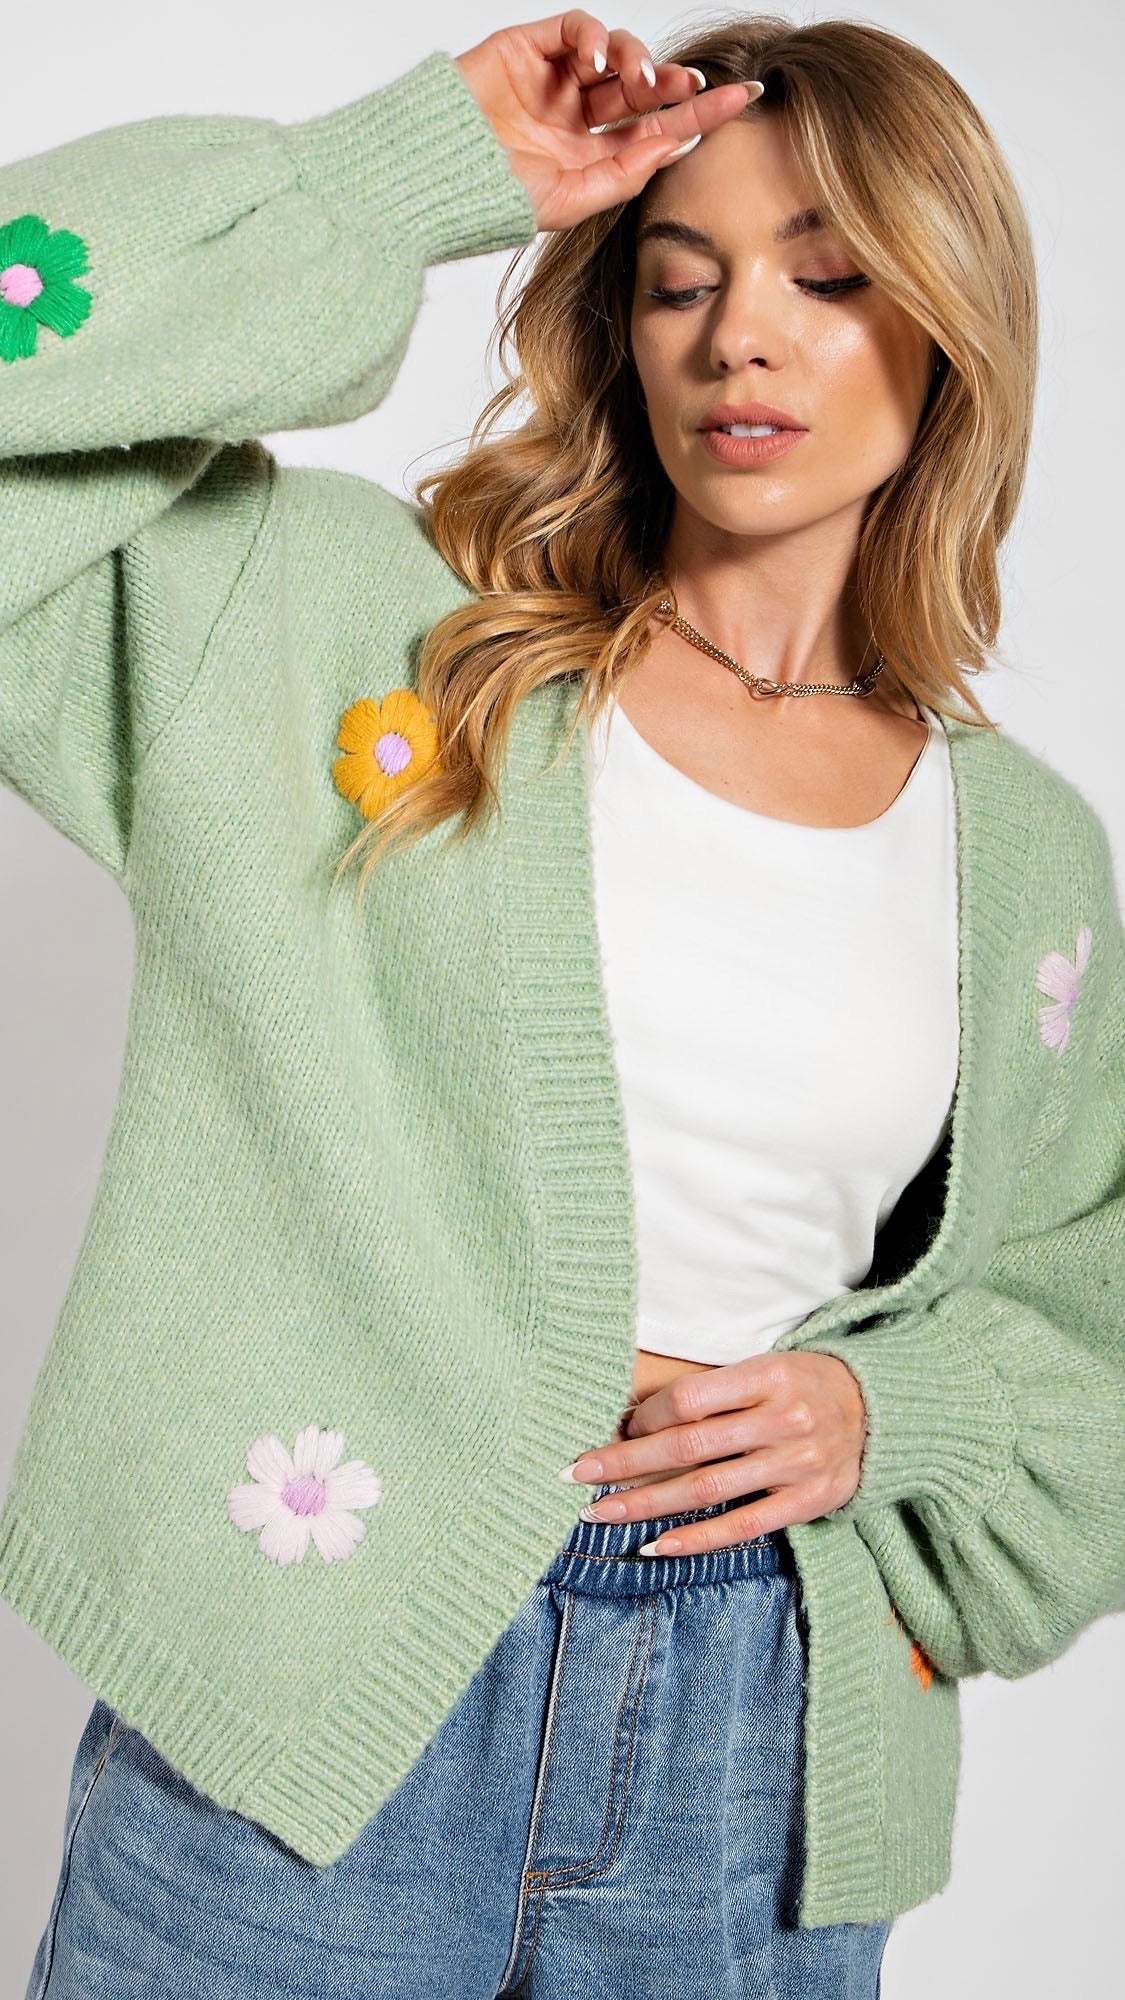 Knitted Flower Cardigan Sage